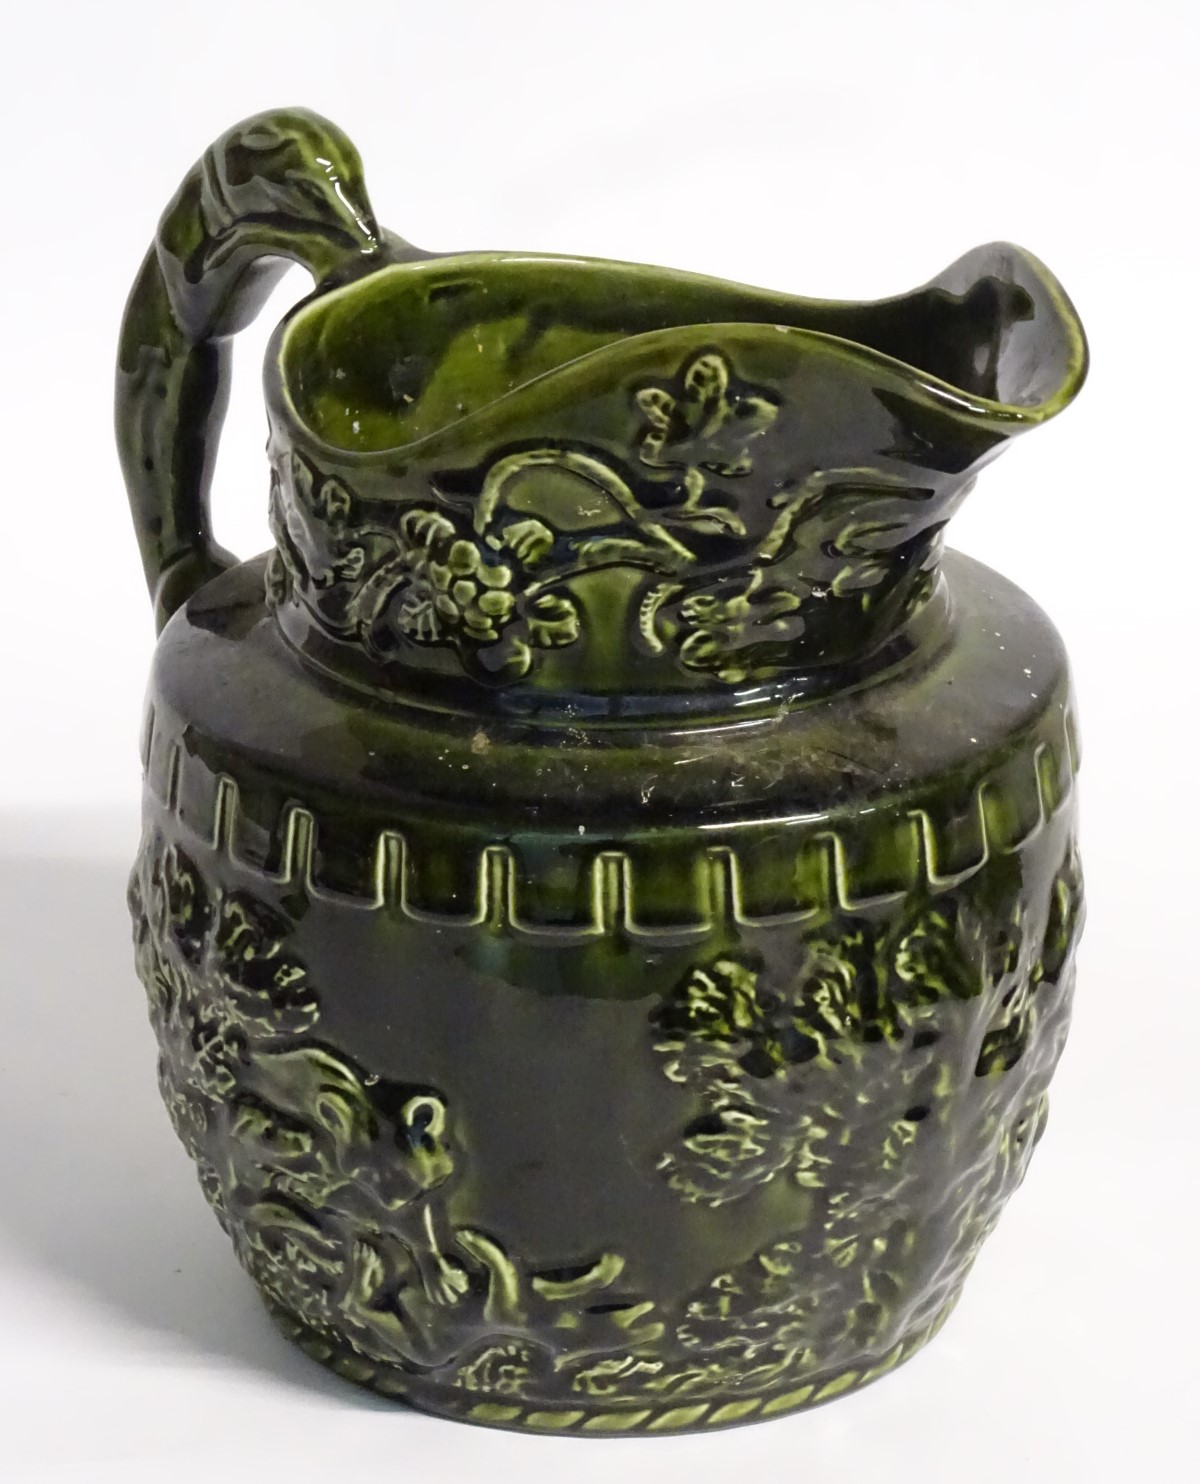 A 20thC Arthur Wood jug / pitcher, decorated with moulded hunting scenes and scrolling foliage, - Image 6 of 8